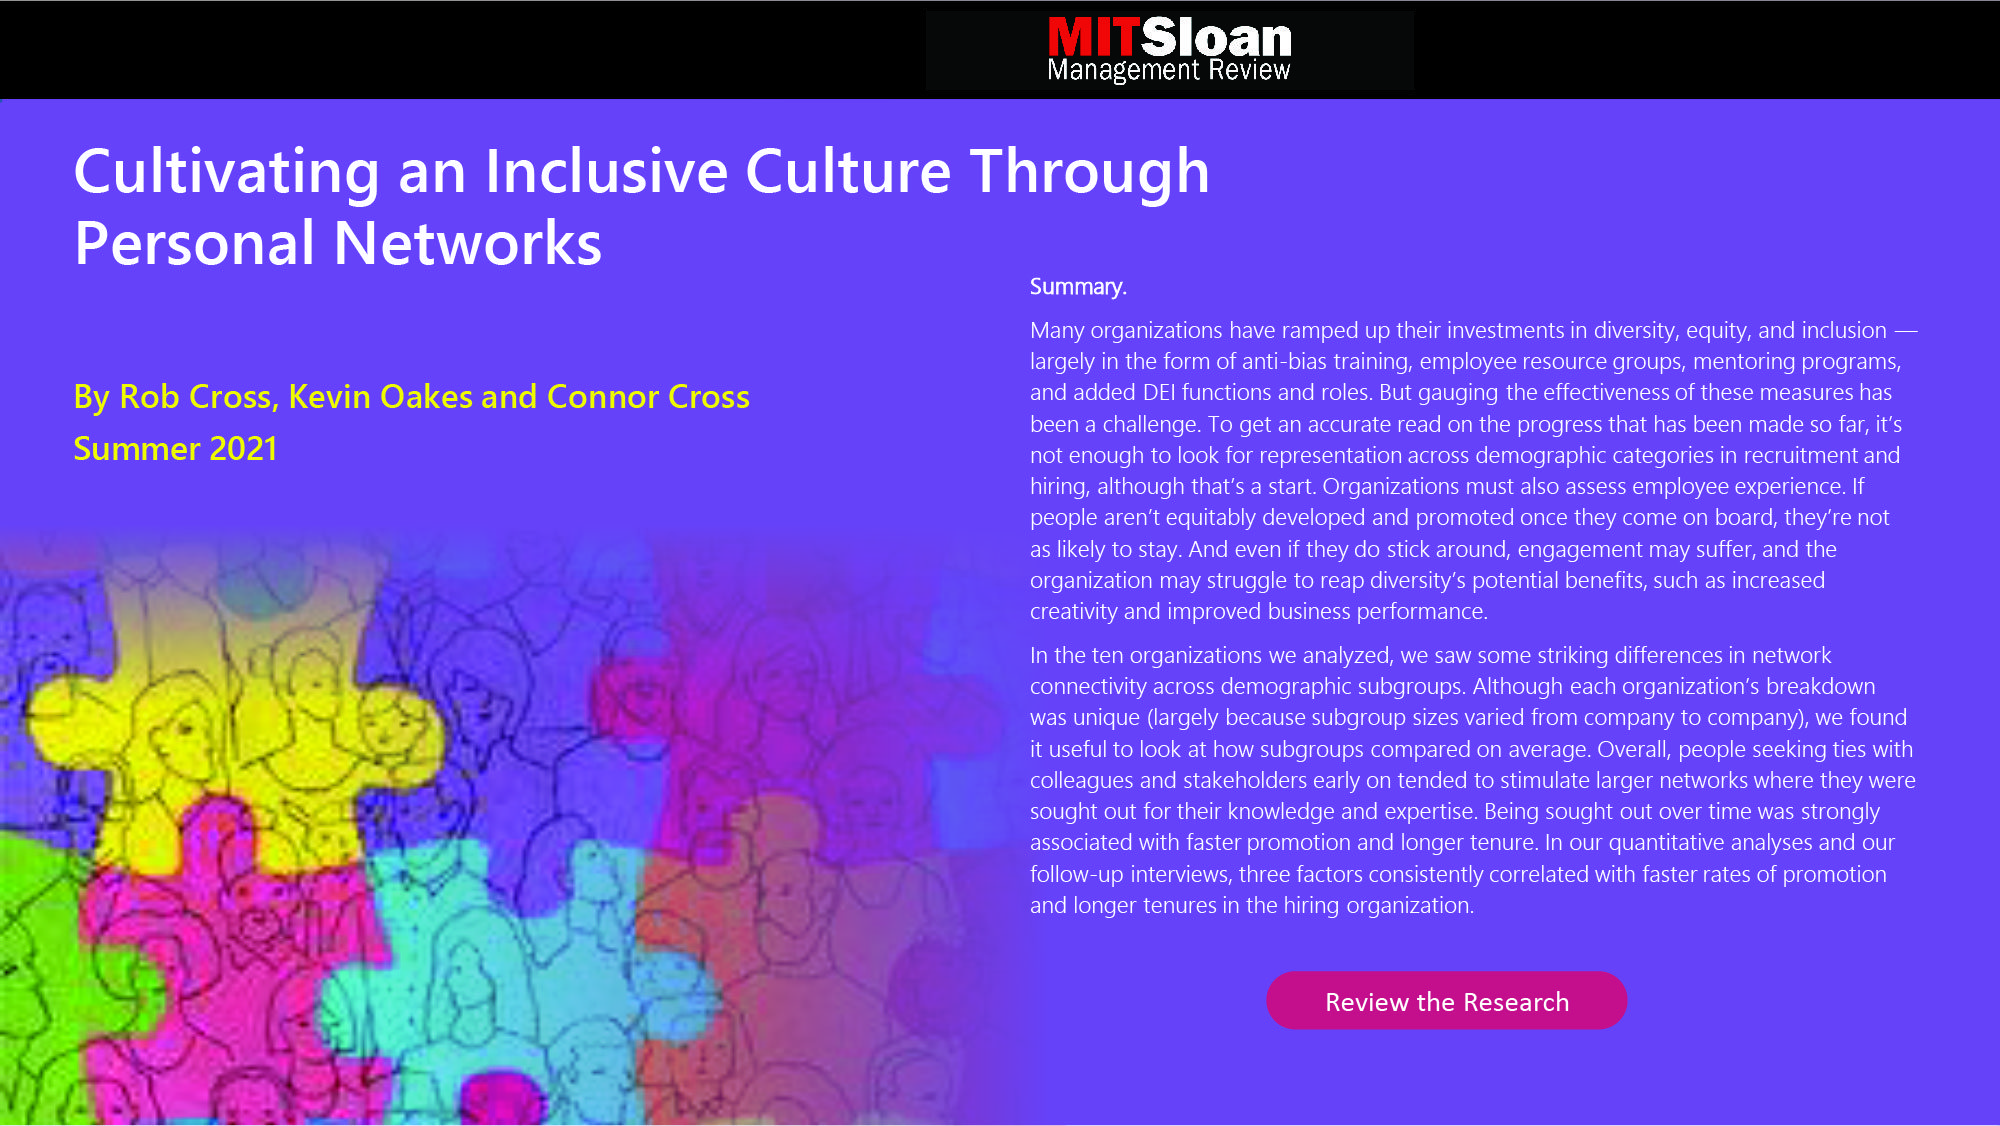 Cultivating an Inclusive Culture Through Personal Networks